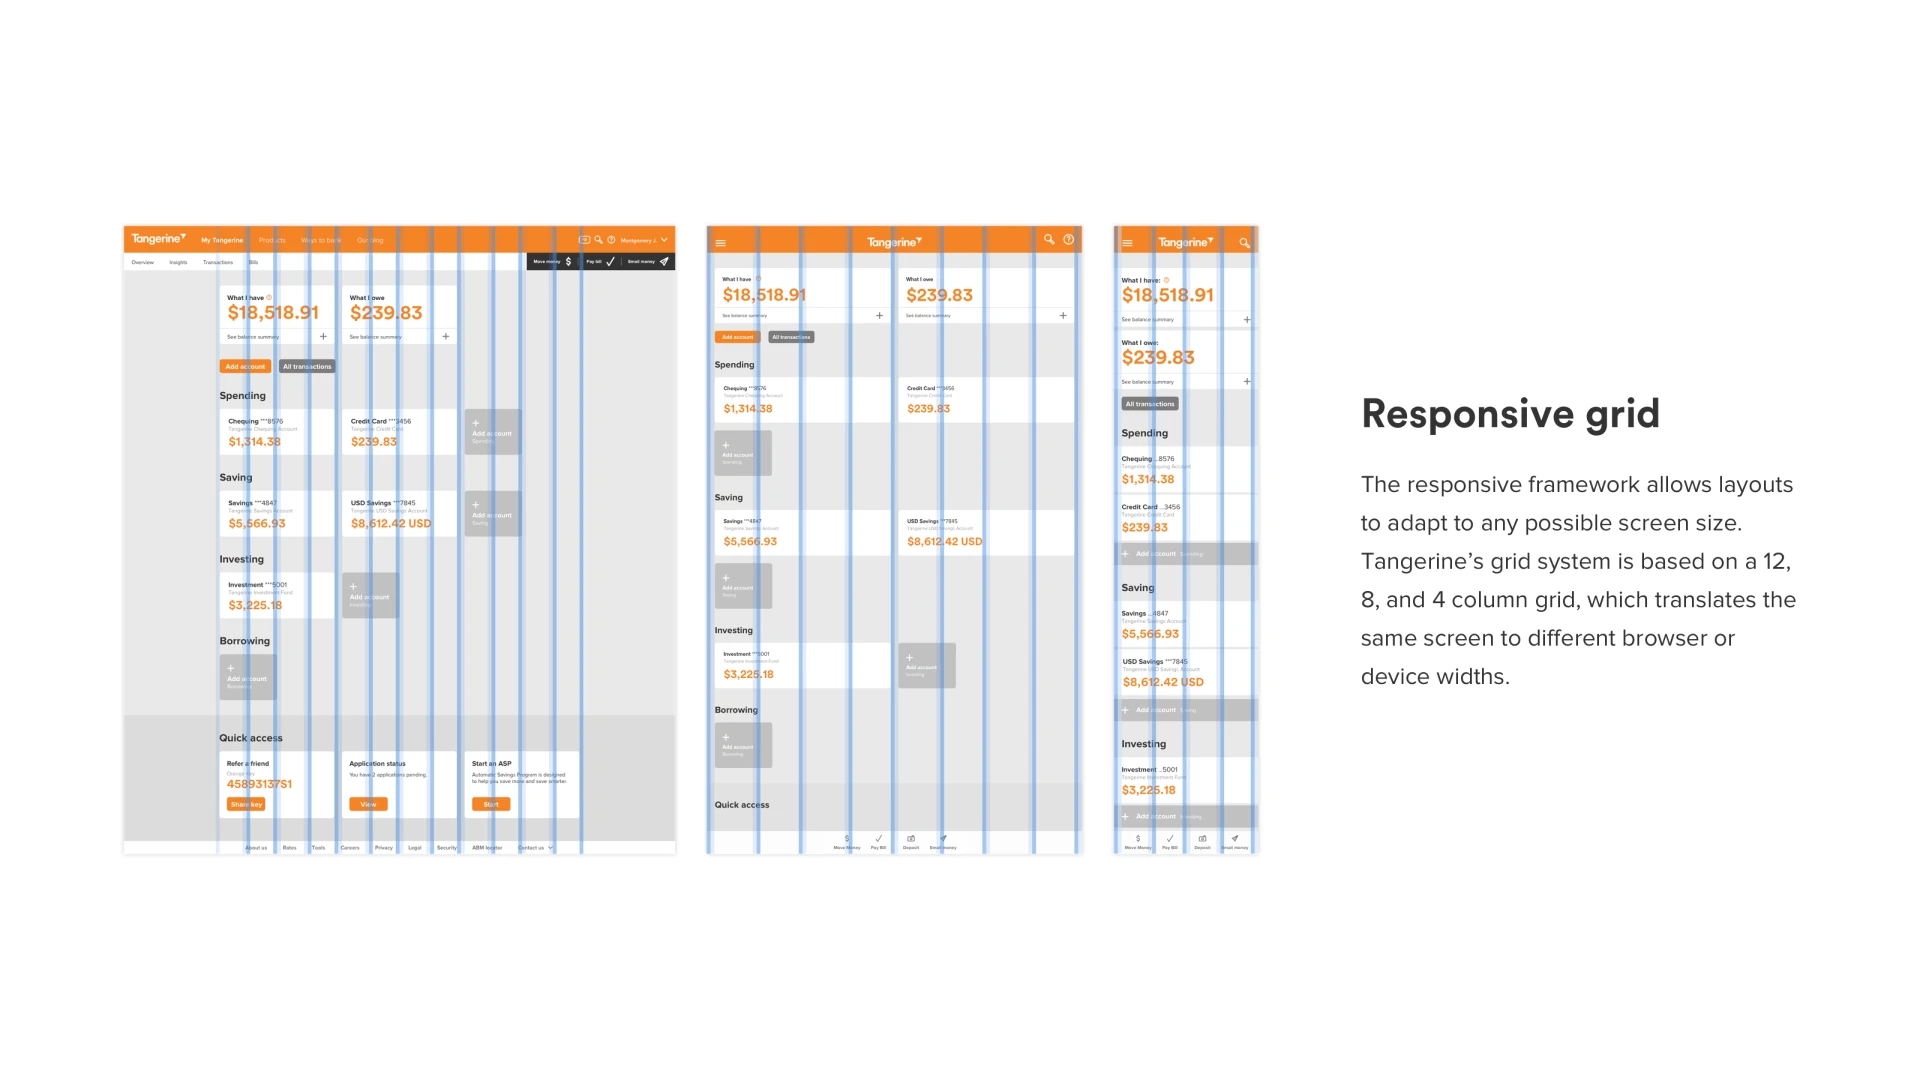 image showing the responsive grid with the following text - The responsive framework allows layouts to adapt to any possible screen size. Tangerine's grid system is based on a 12, 8, and 4 column grid, which translates the same screen to different browser or device widths.